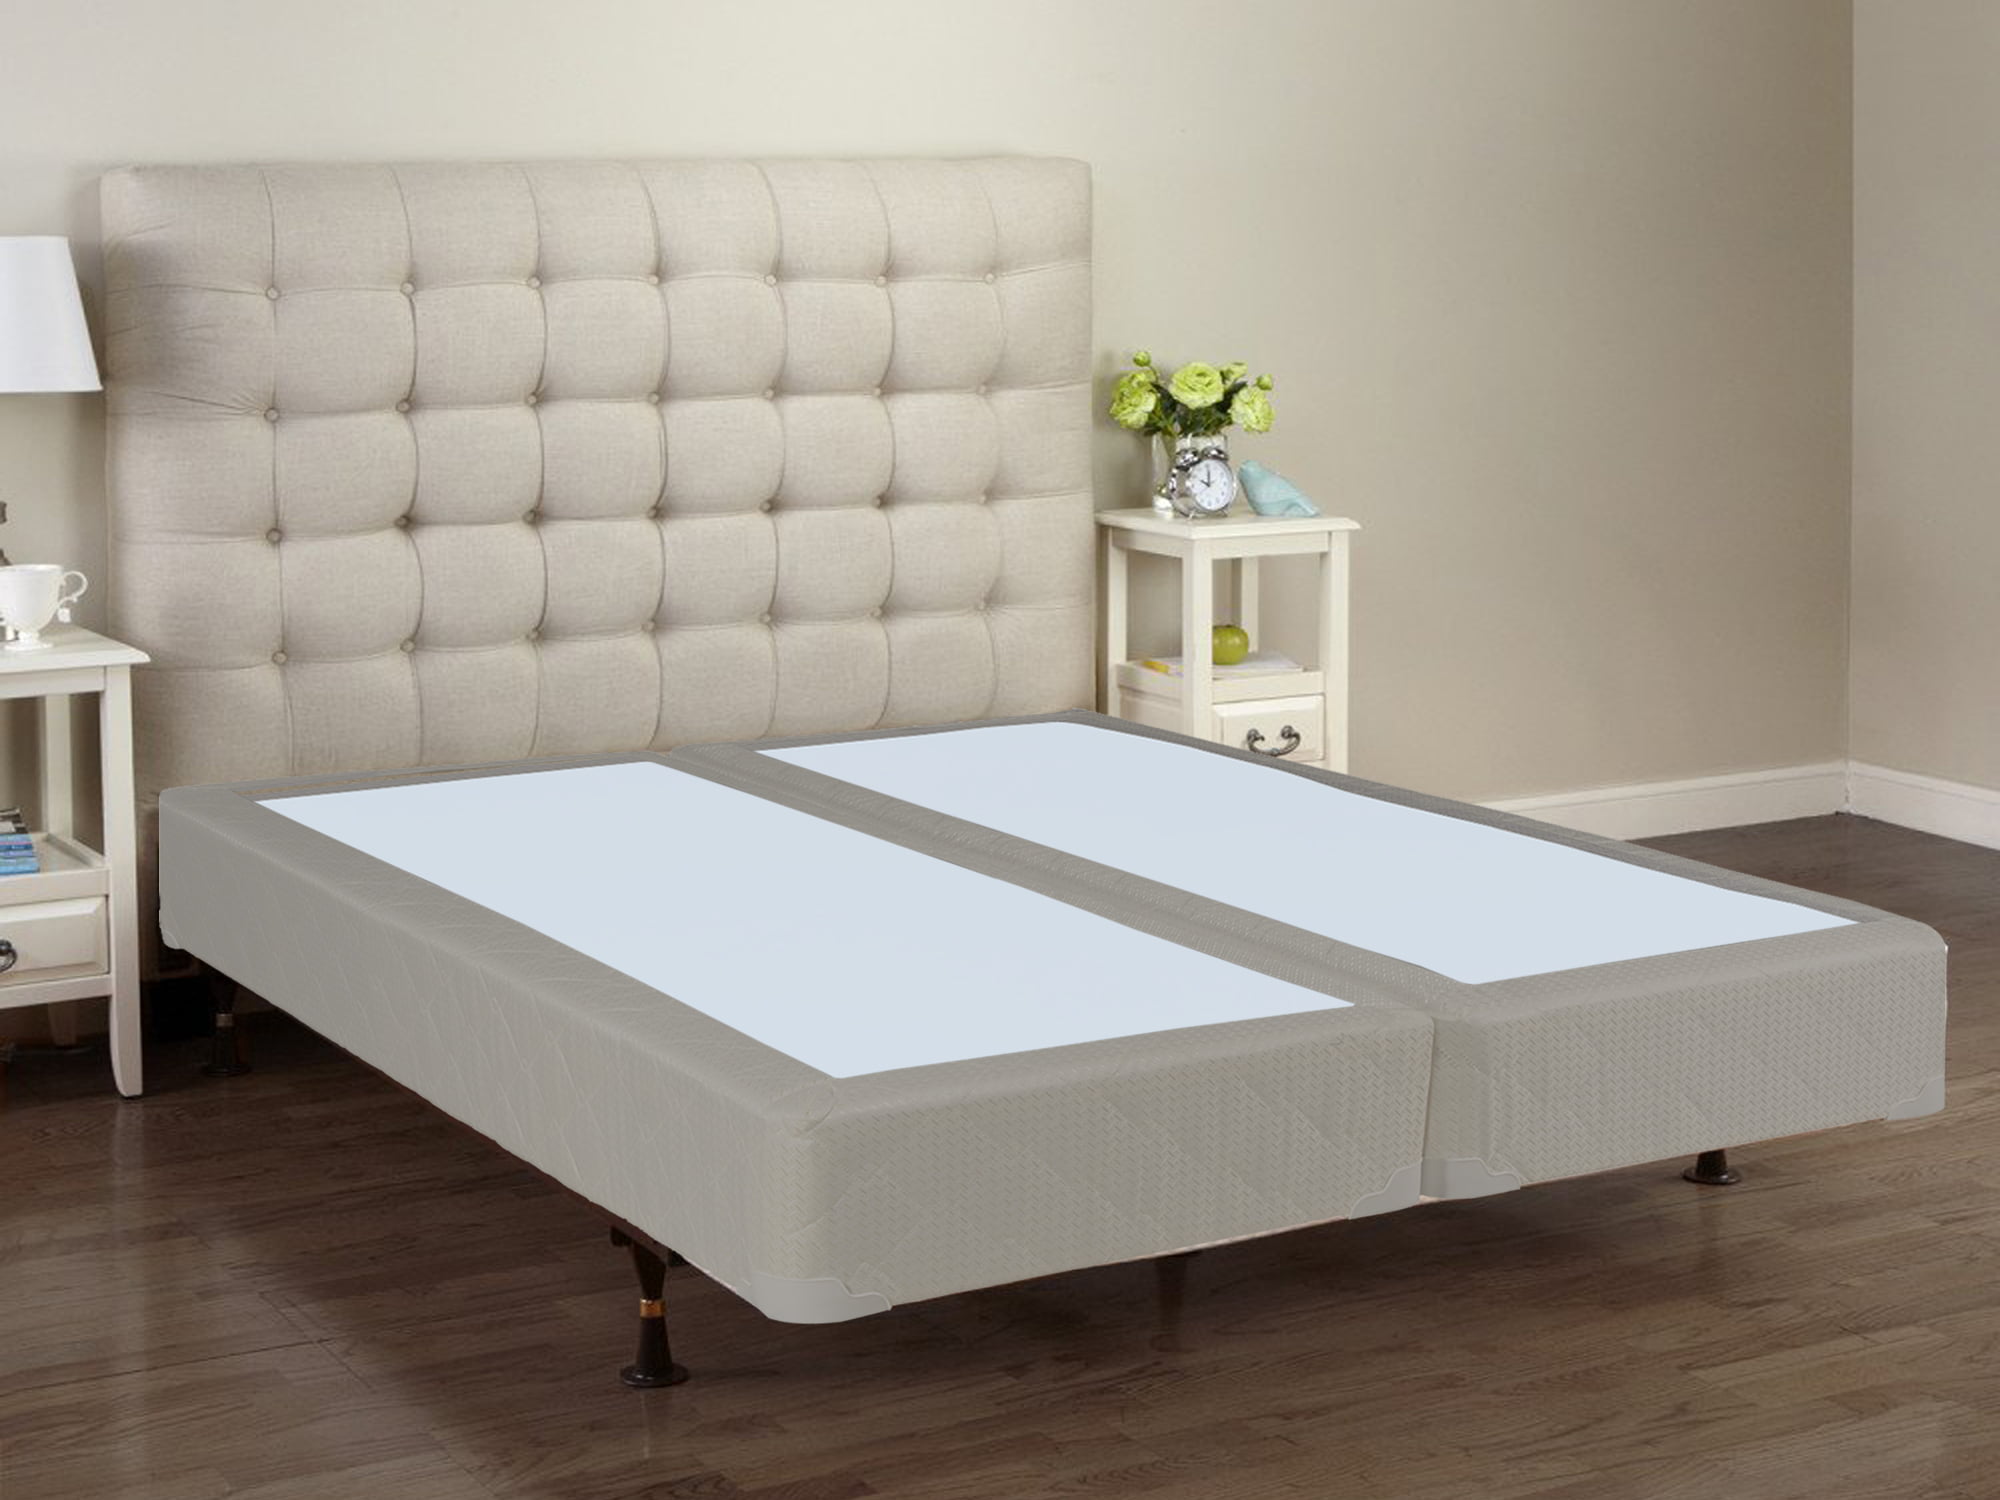 king bed with mattress and box spring